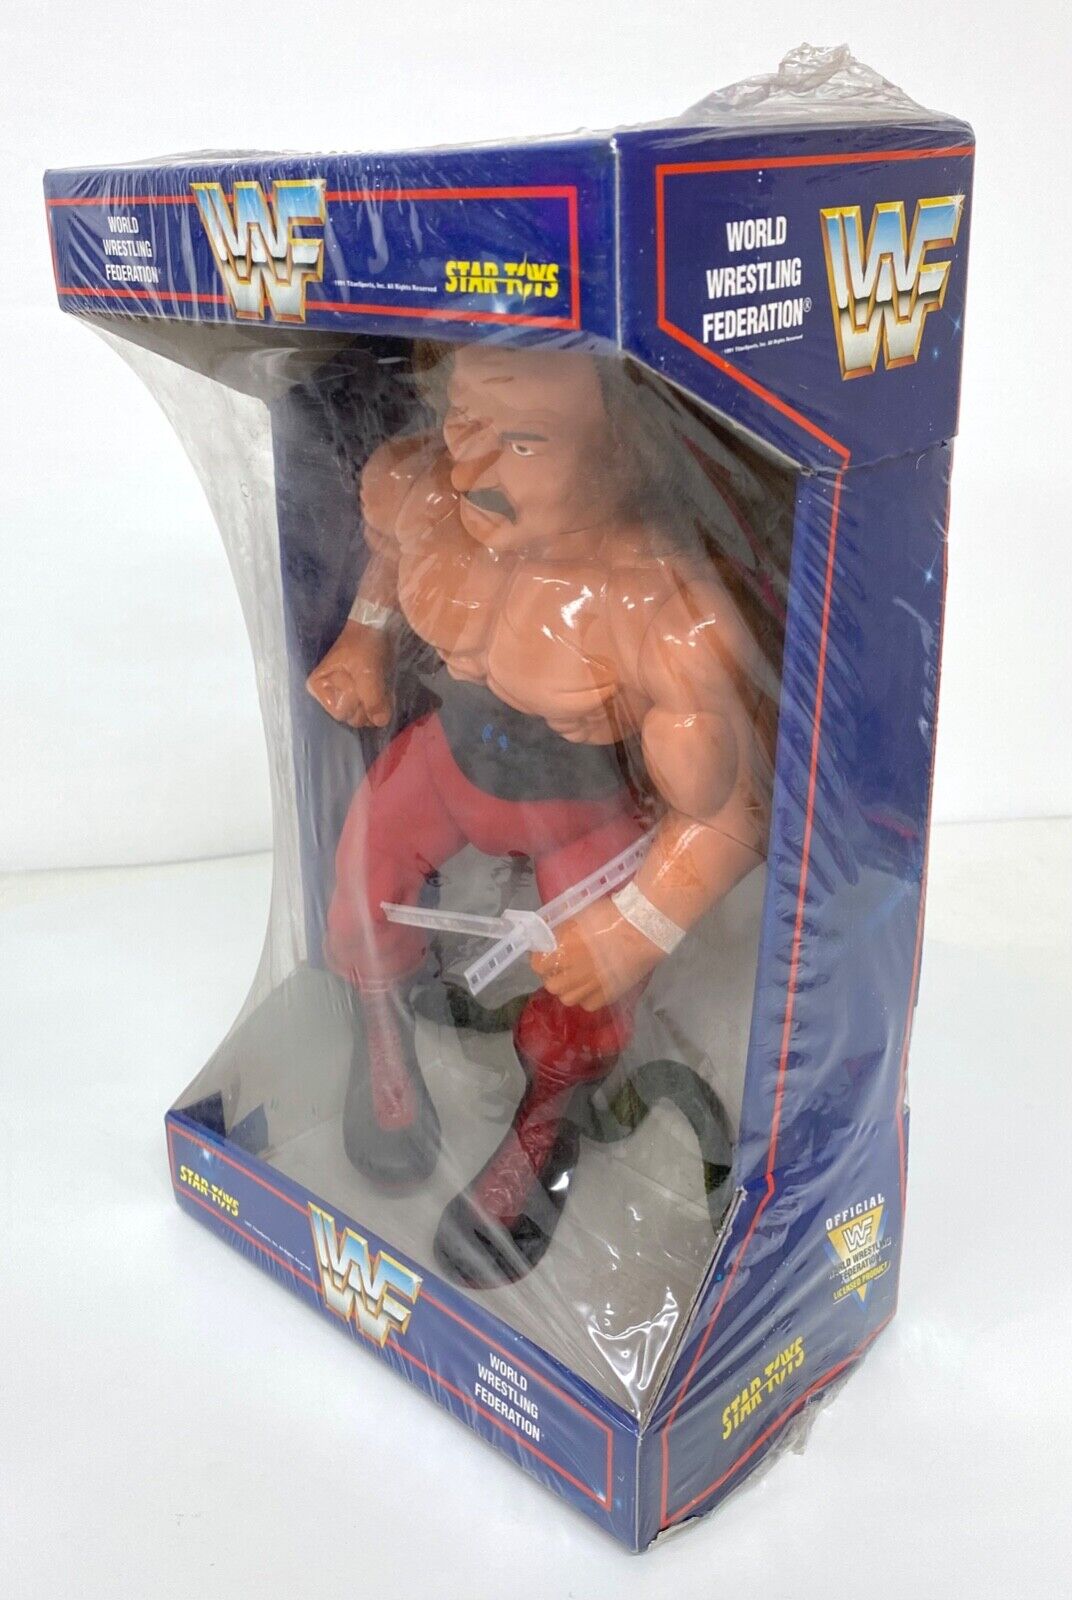 1991 WWF Star Toys 14" Articulated Series 1 Jake "The Snake" Roberts